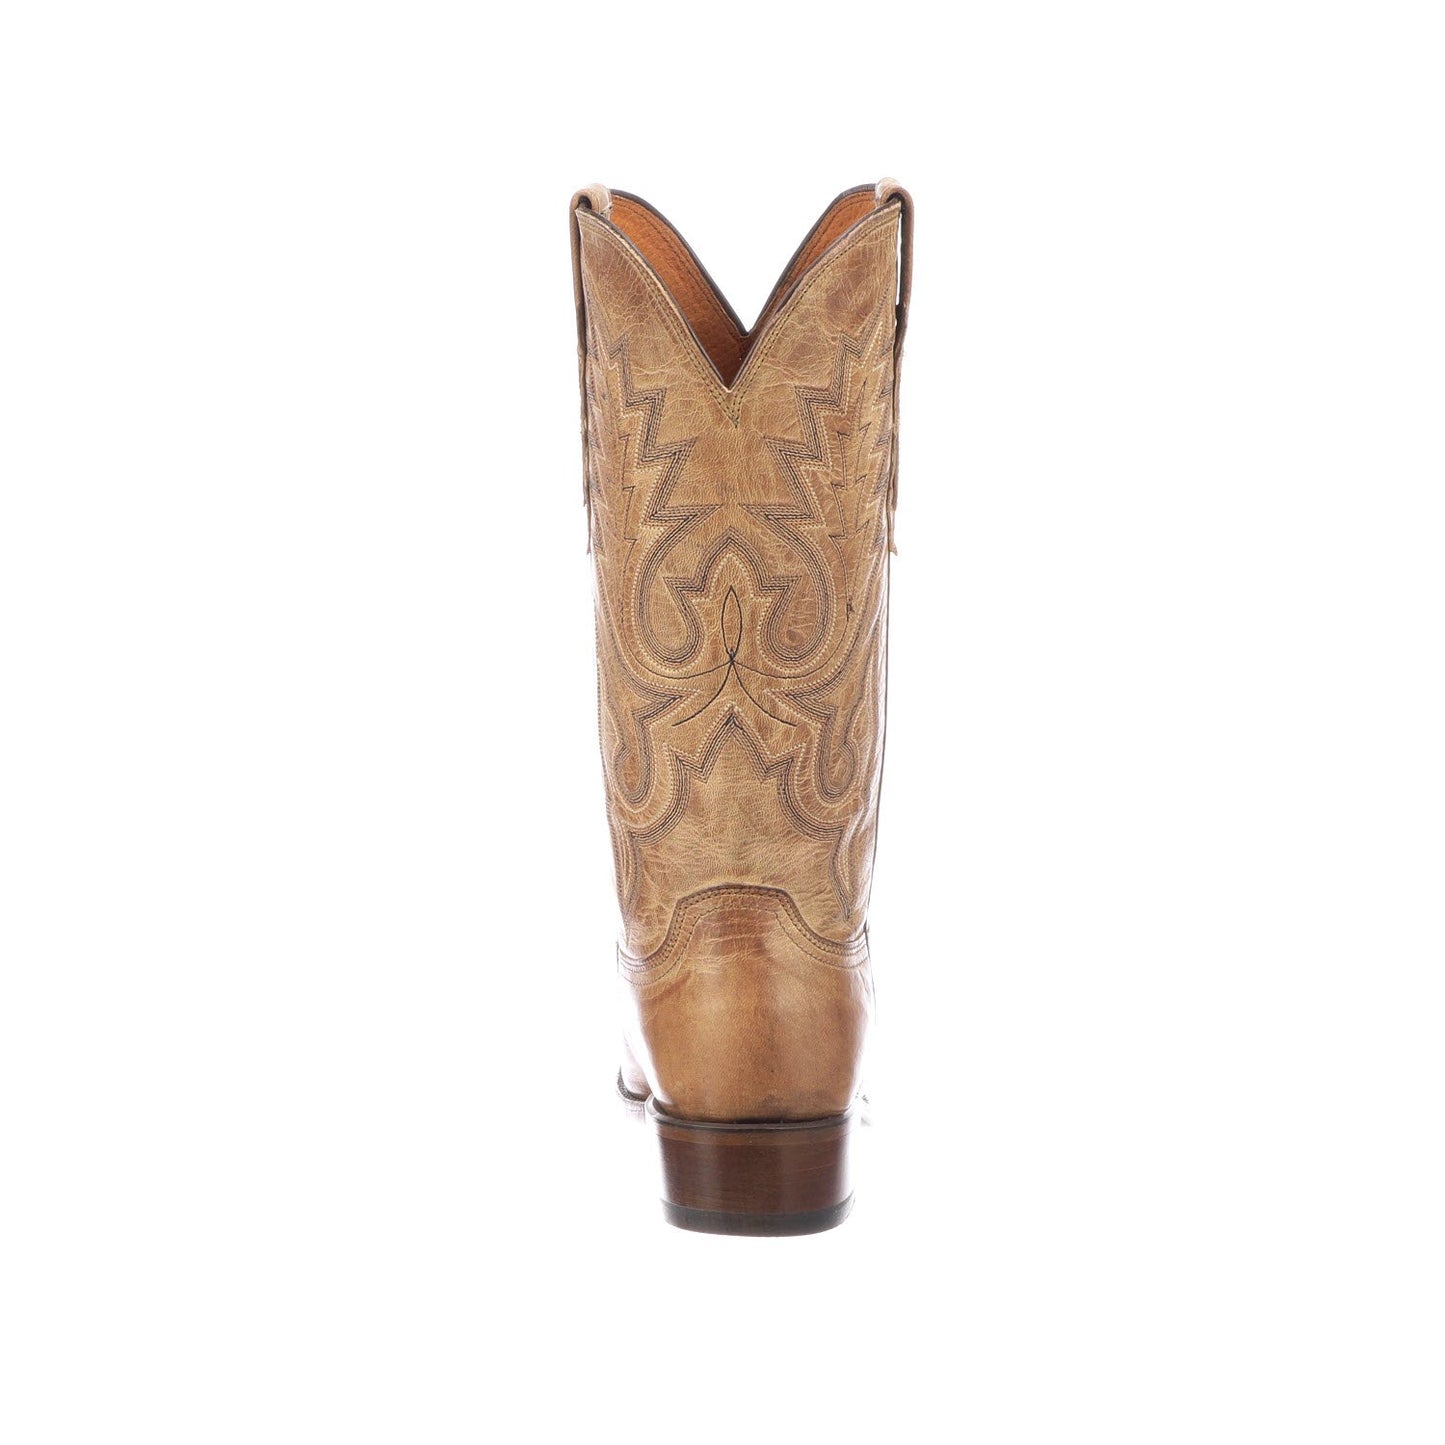 M1008.R4 Lucchese Bootmaker Men's LEWIS Mad Dog Tan Goat Round Toe